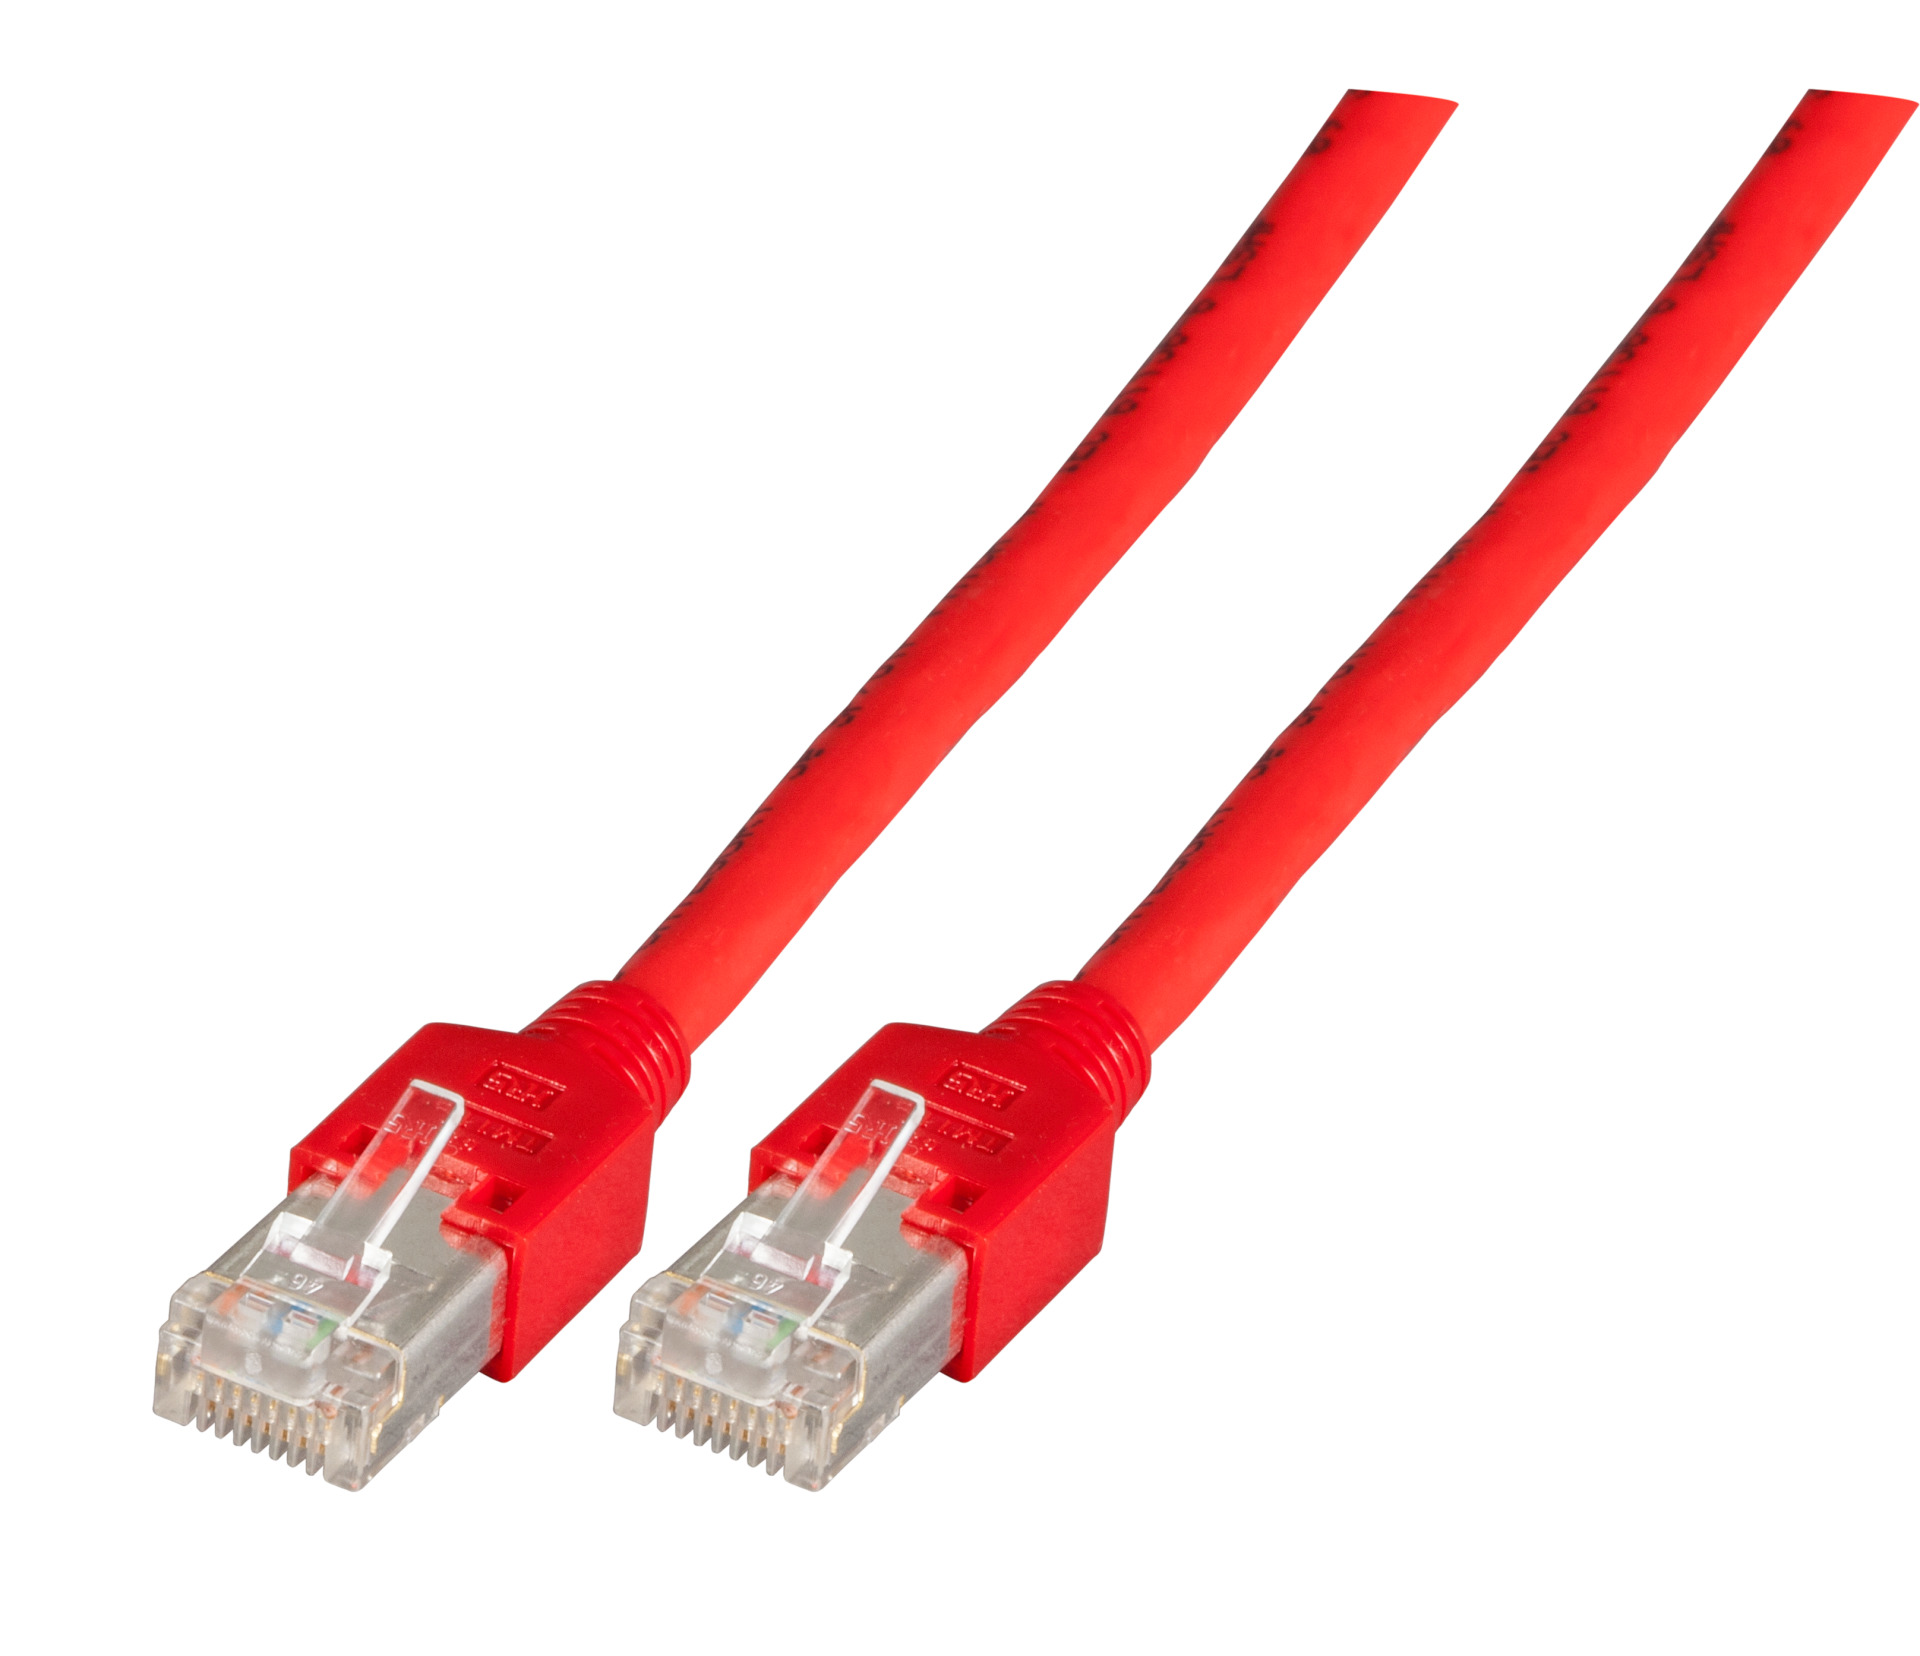 RJ45 Patch cable SF/UTP, Cat.5e, TM11, UC300, 2m, red